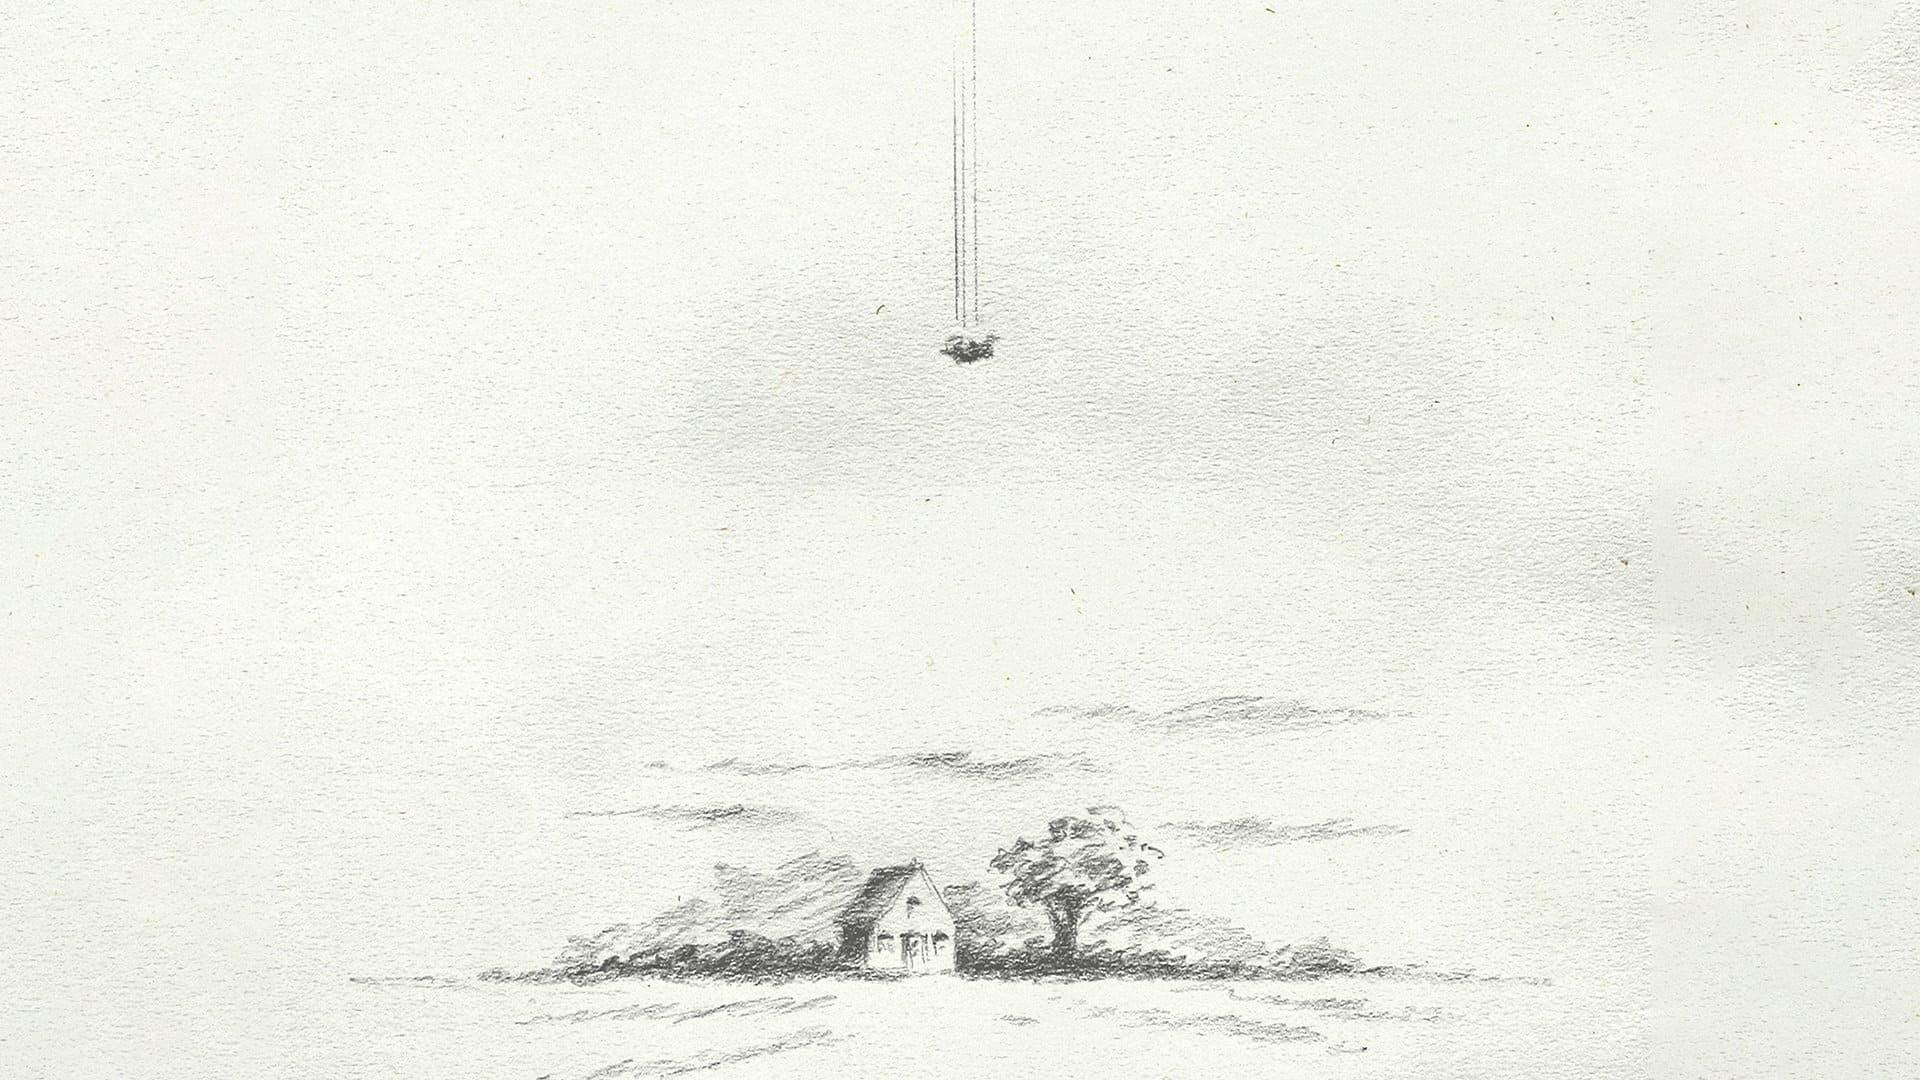 A Man Falls from the Sky backdrop